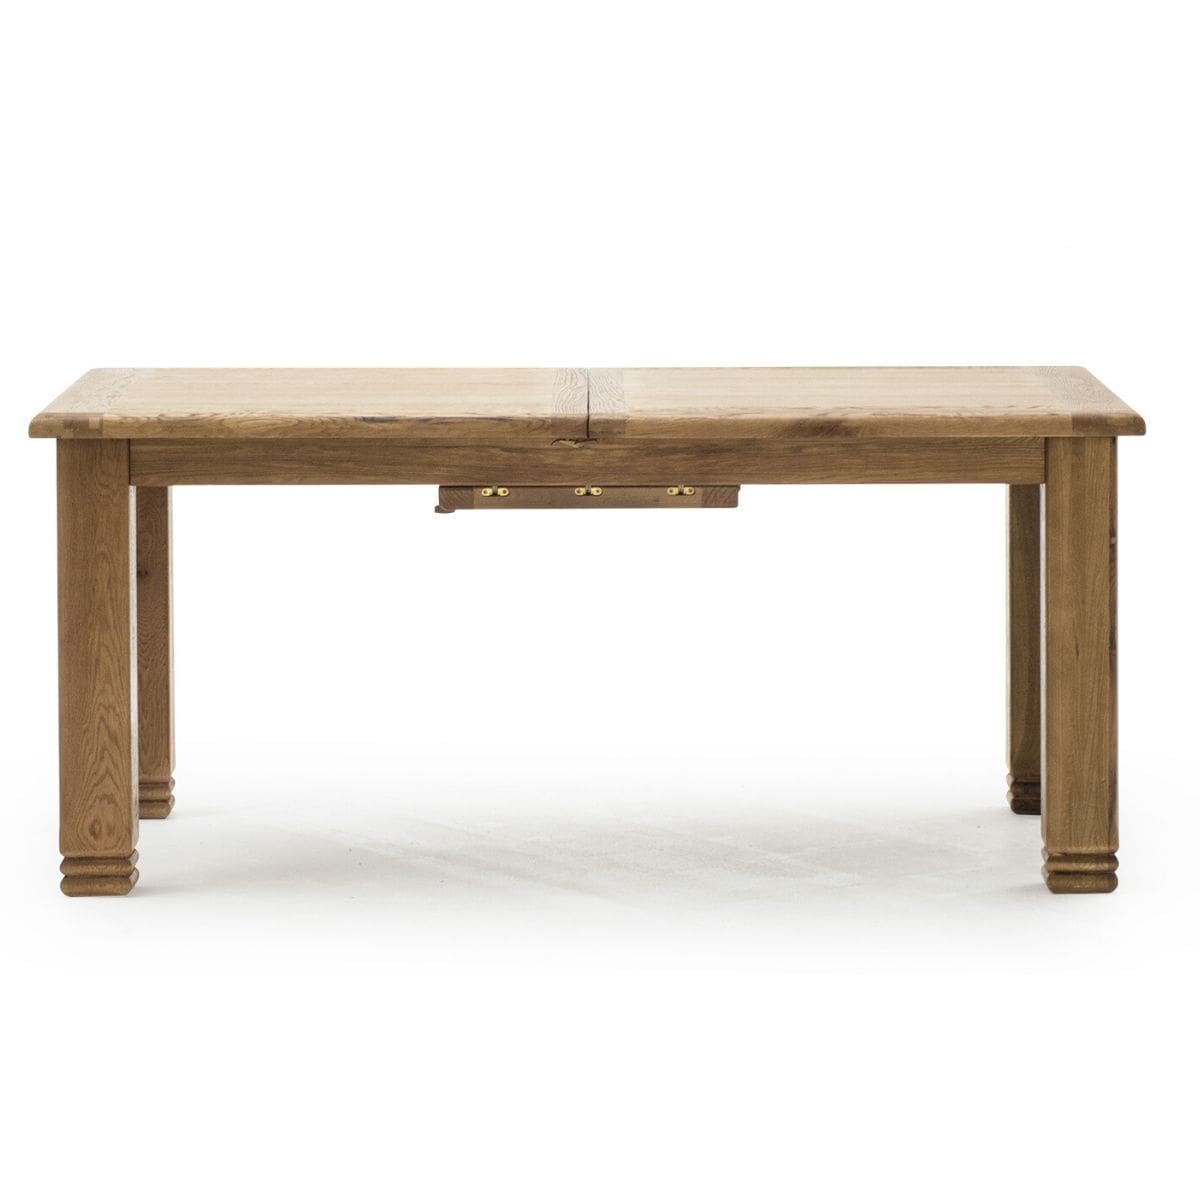 Dunloe Dining Table available at Corcoran's Furniture & Carpets